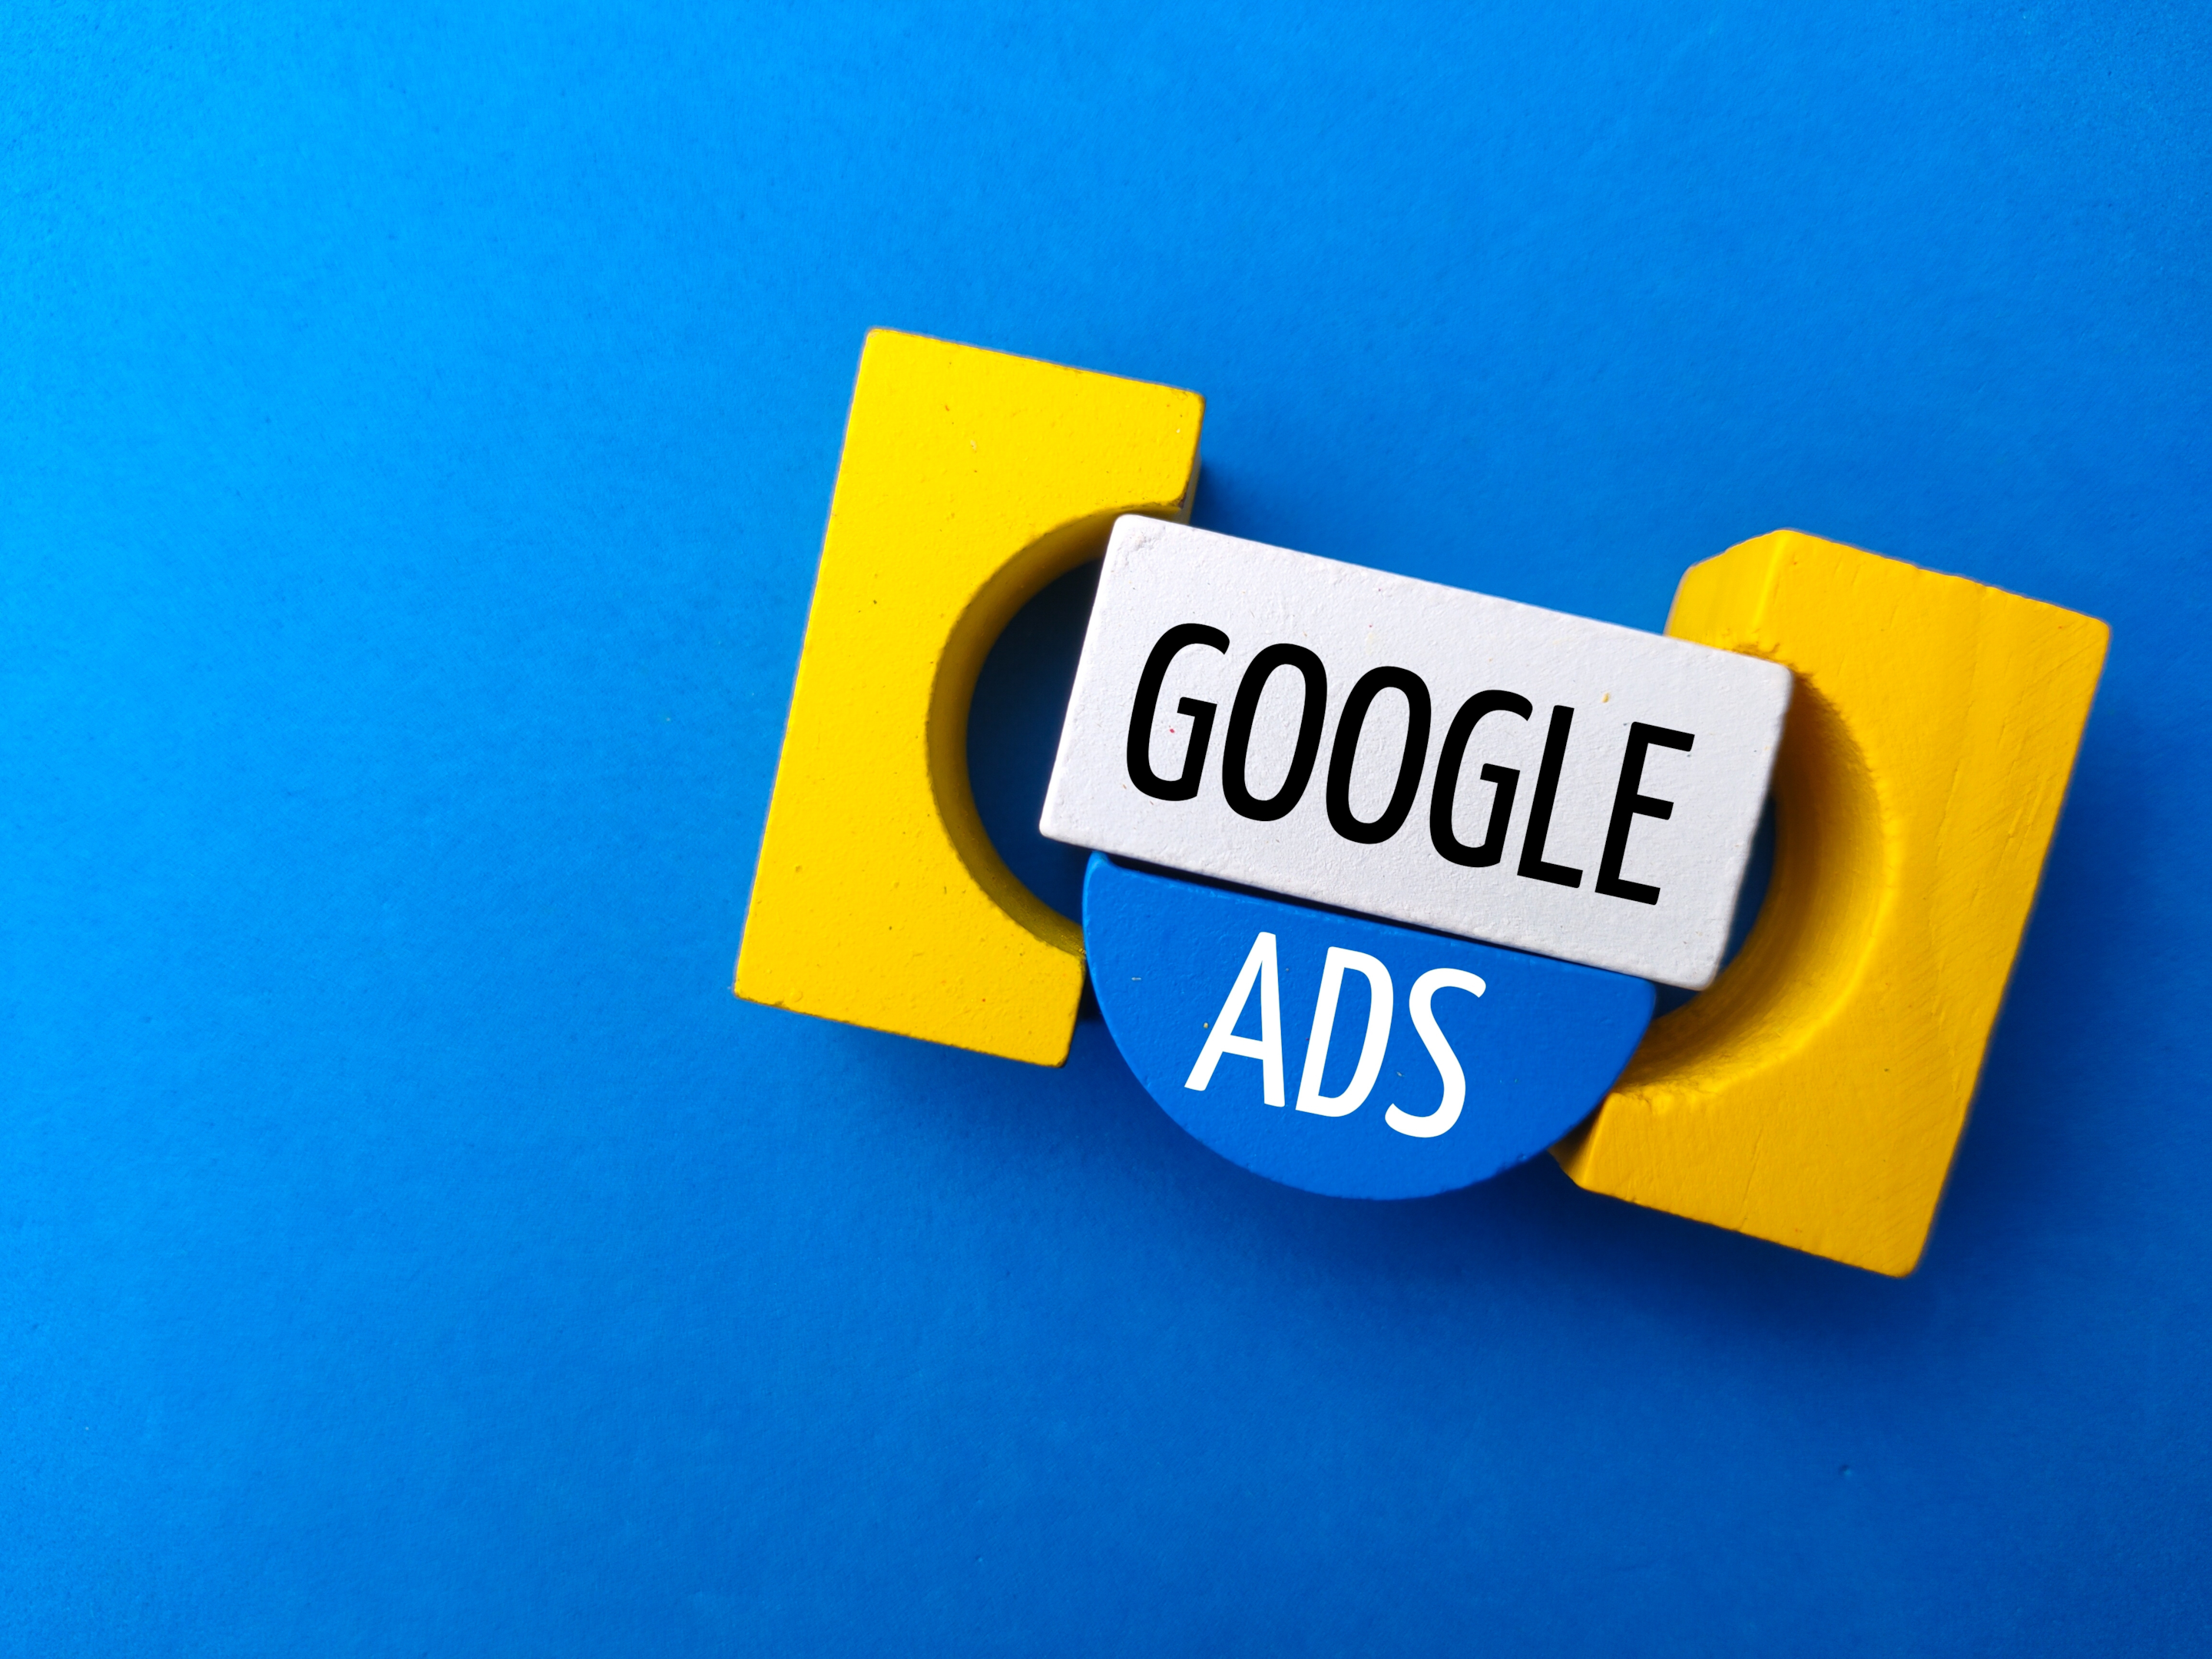 Google ads: Everything you need to know